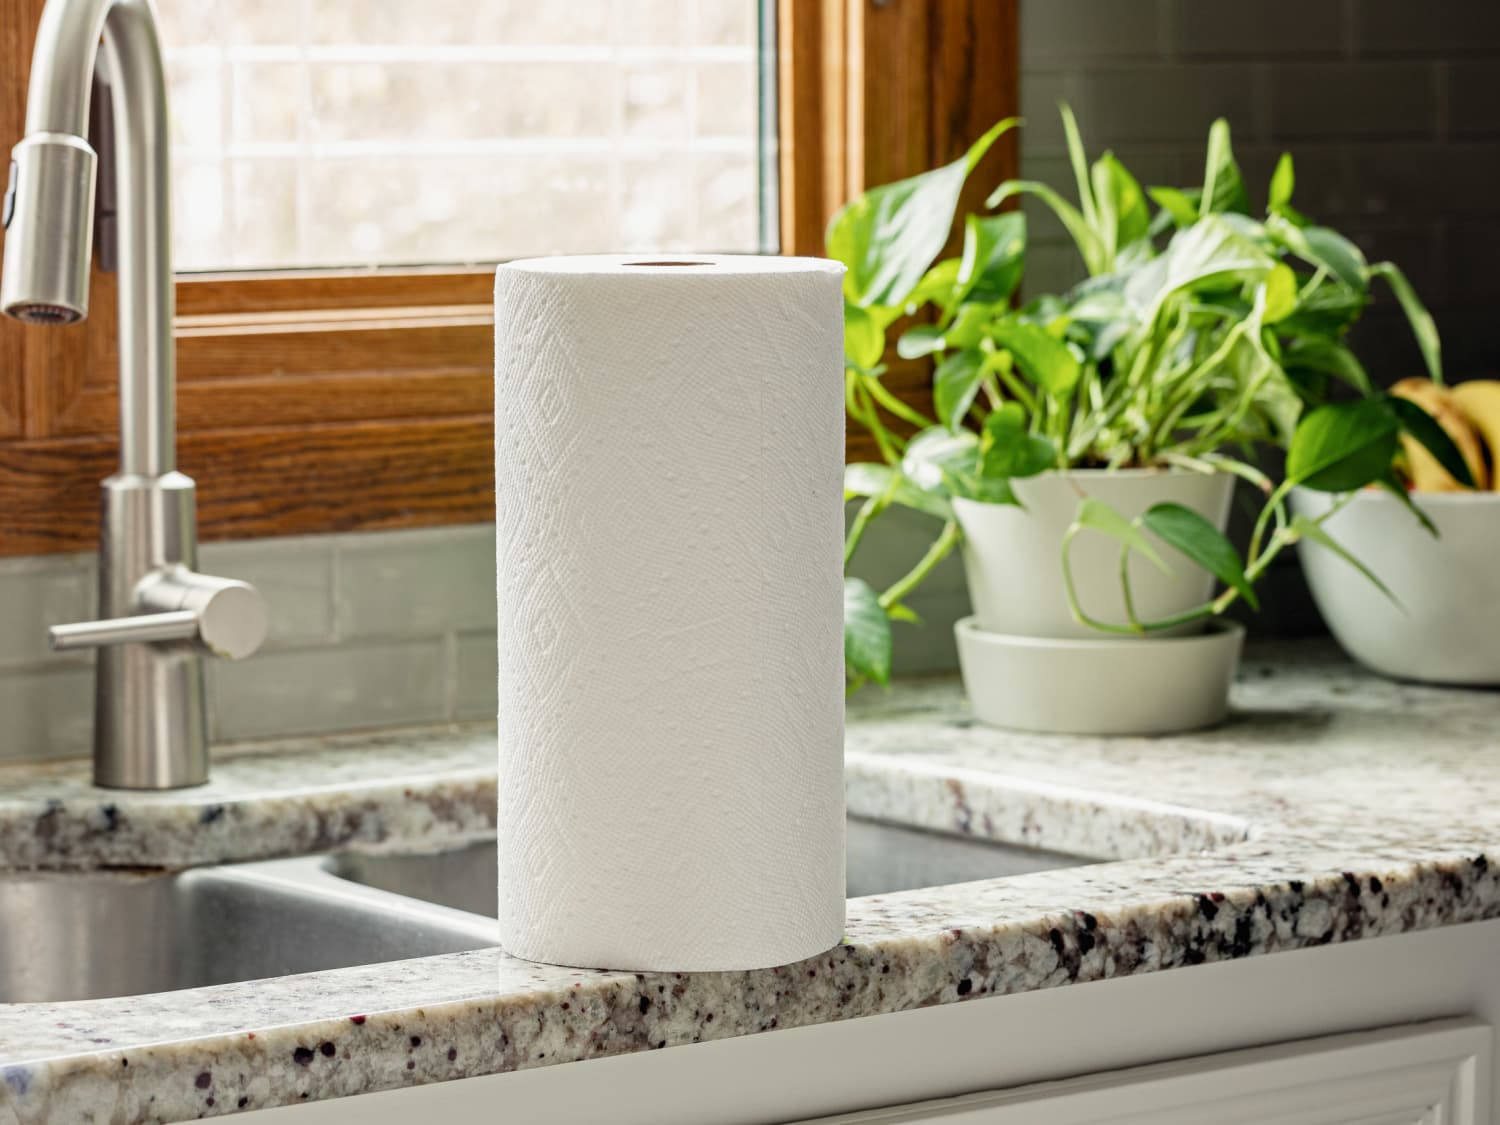 This Sleek Umbra Paper Towel Holder Cleared Up My Countertop Clutter